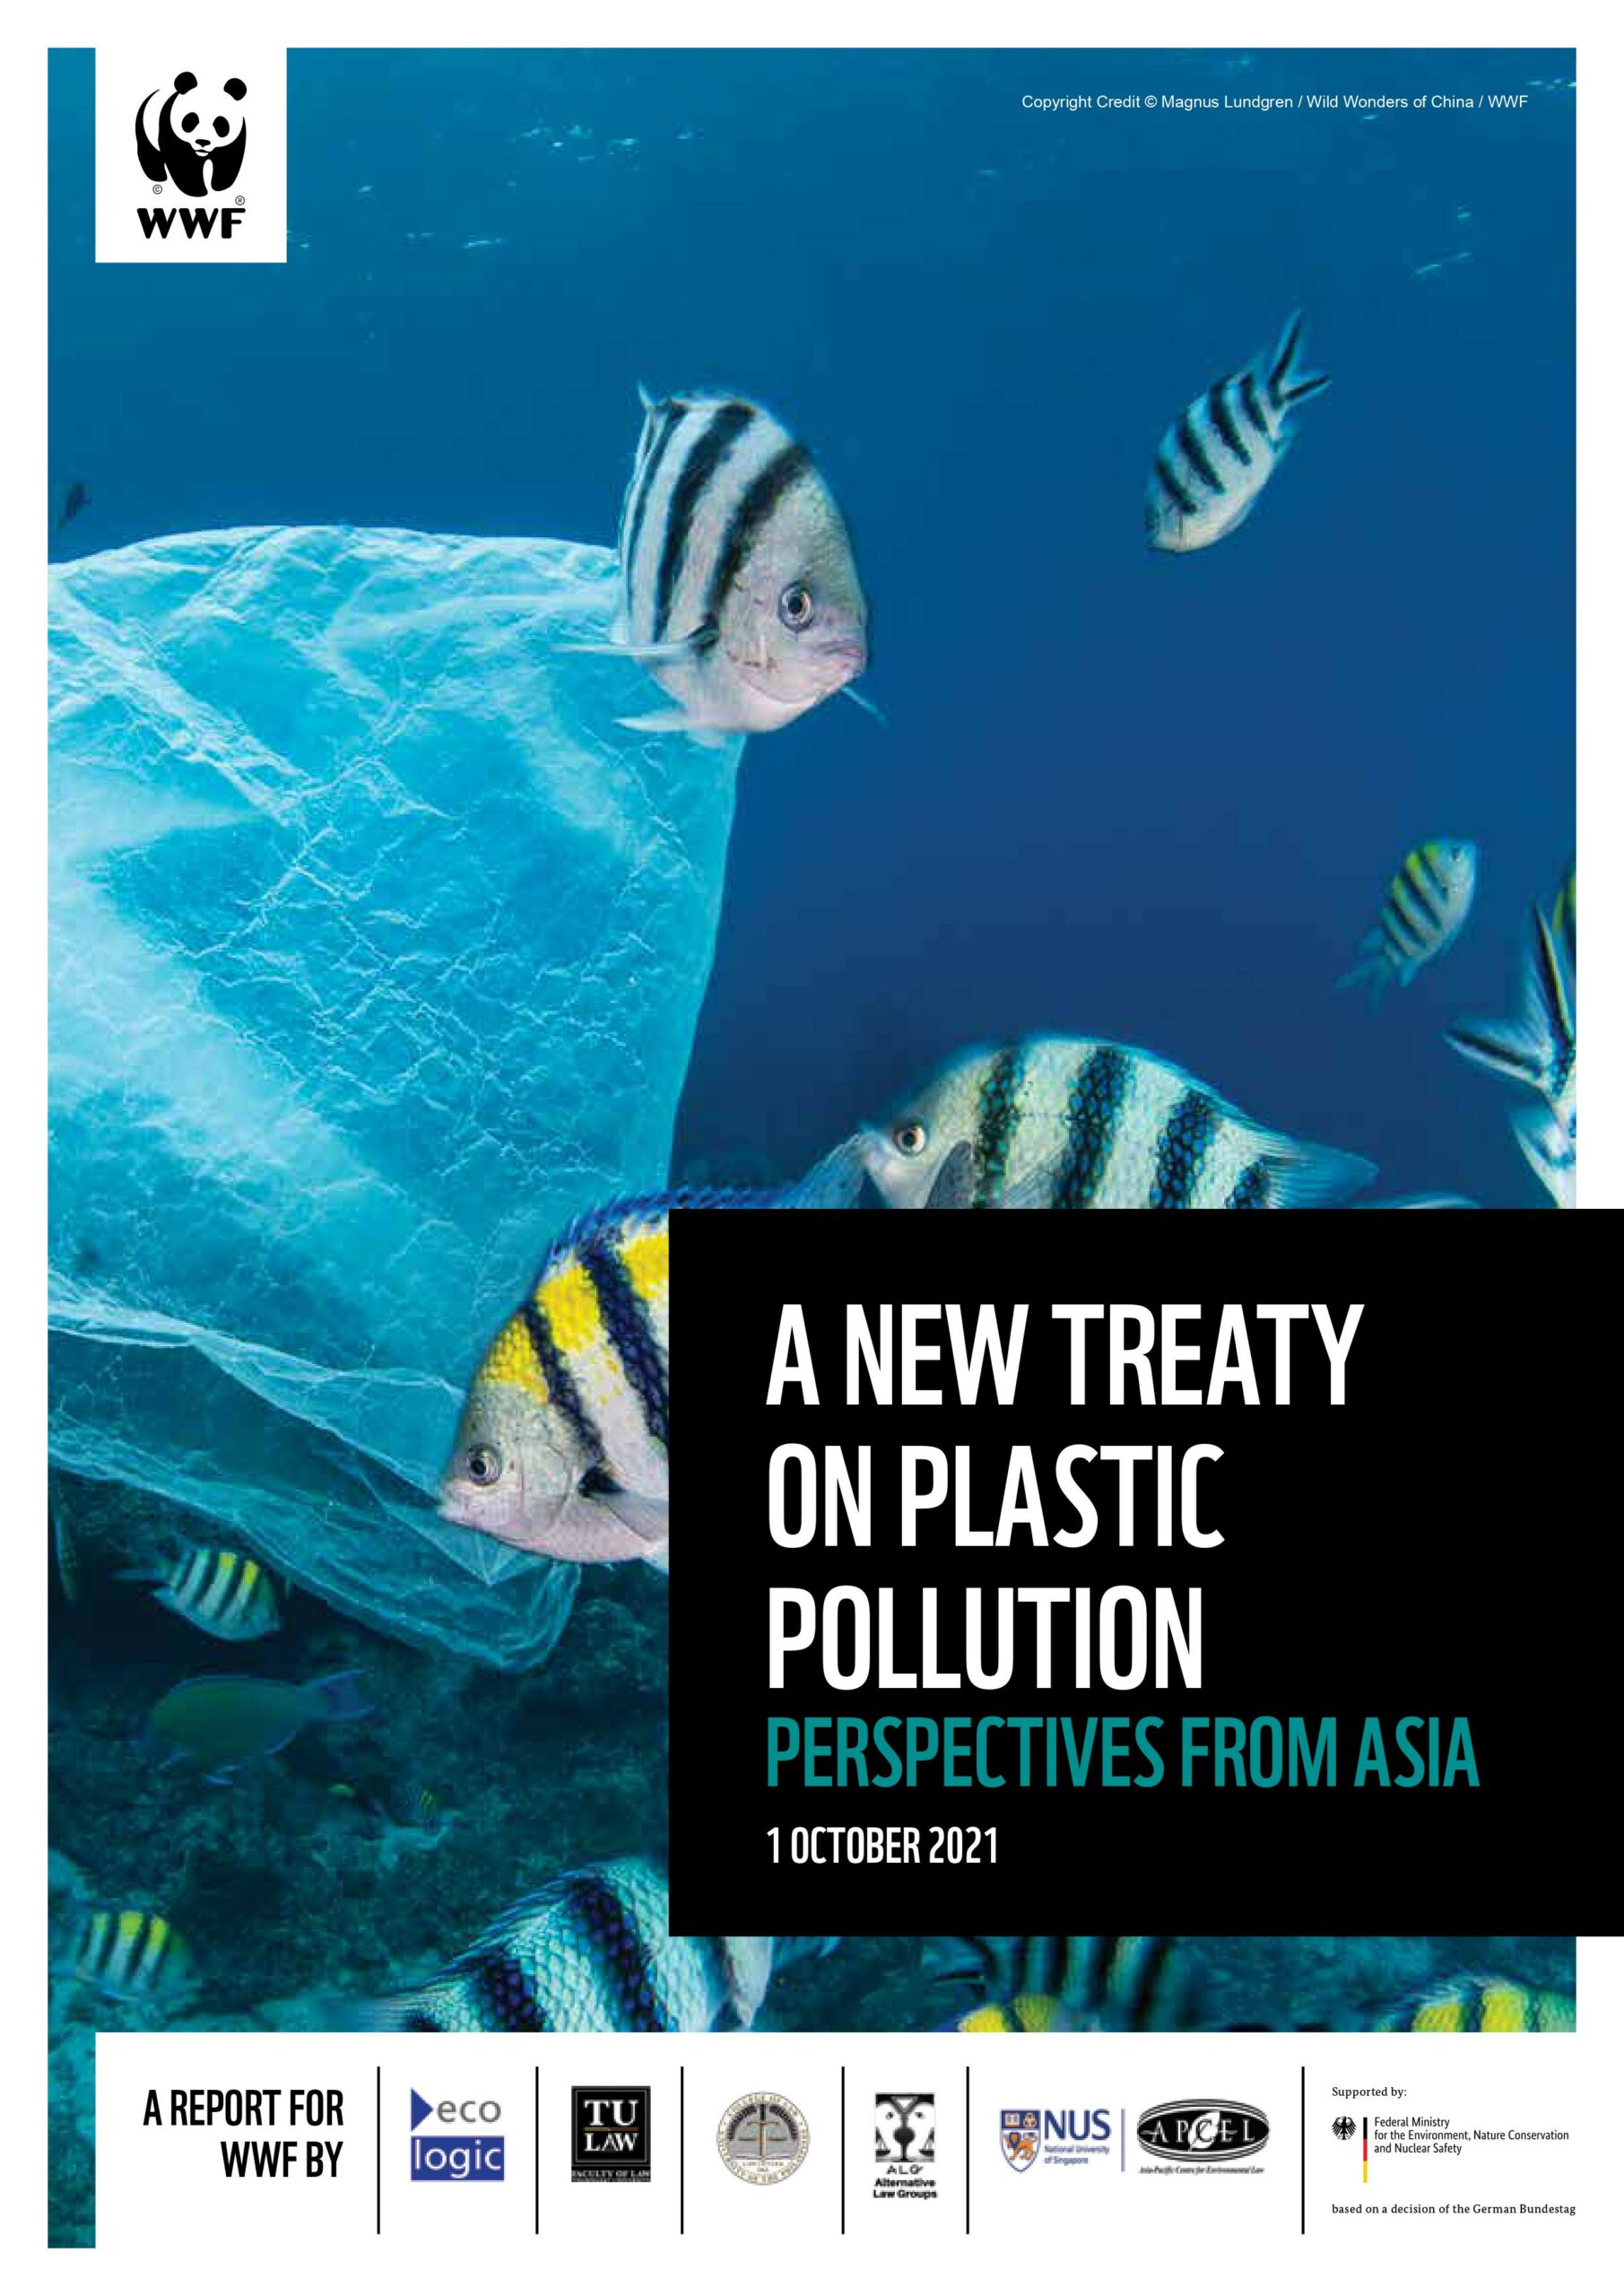 UP-IILS Launches “A New Treaty on Plastic Pollution: Perspectives form Asia”